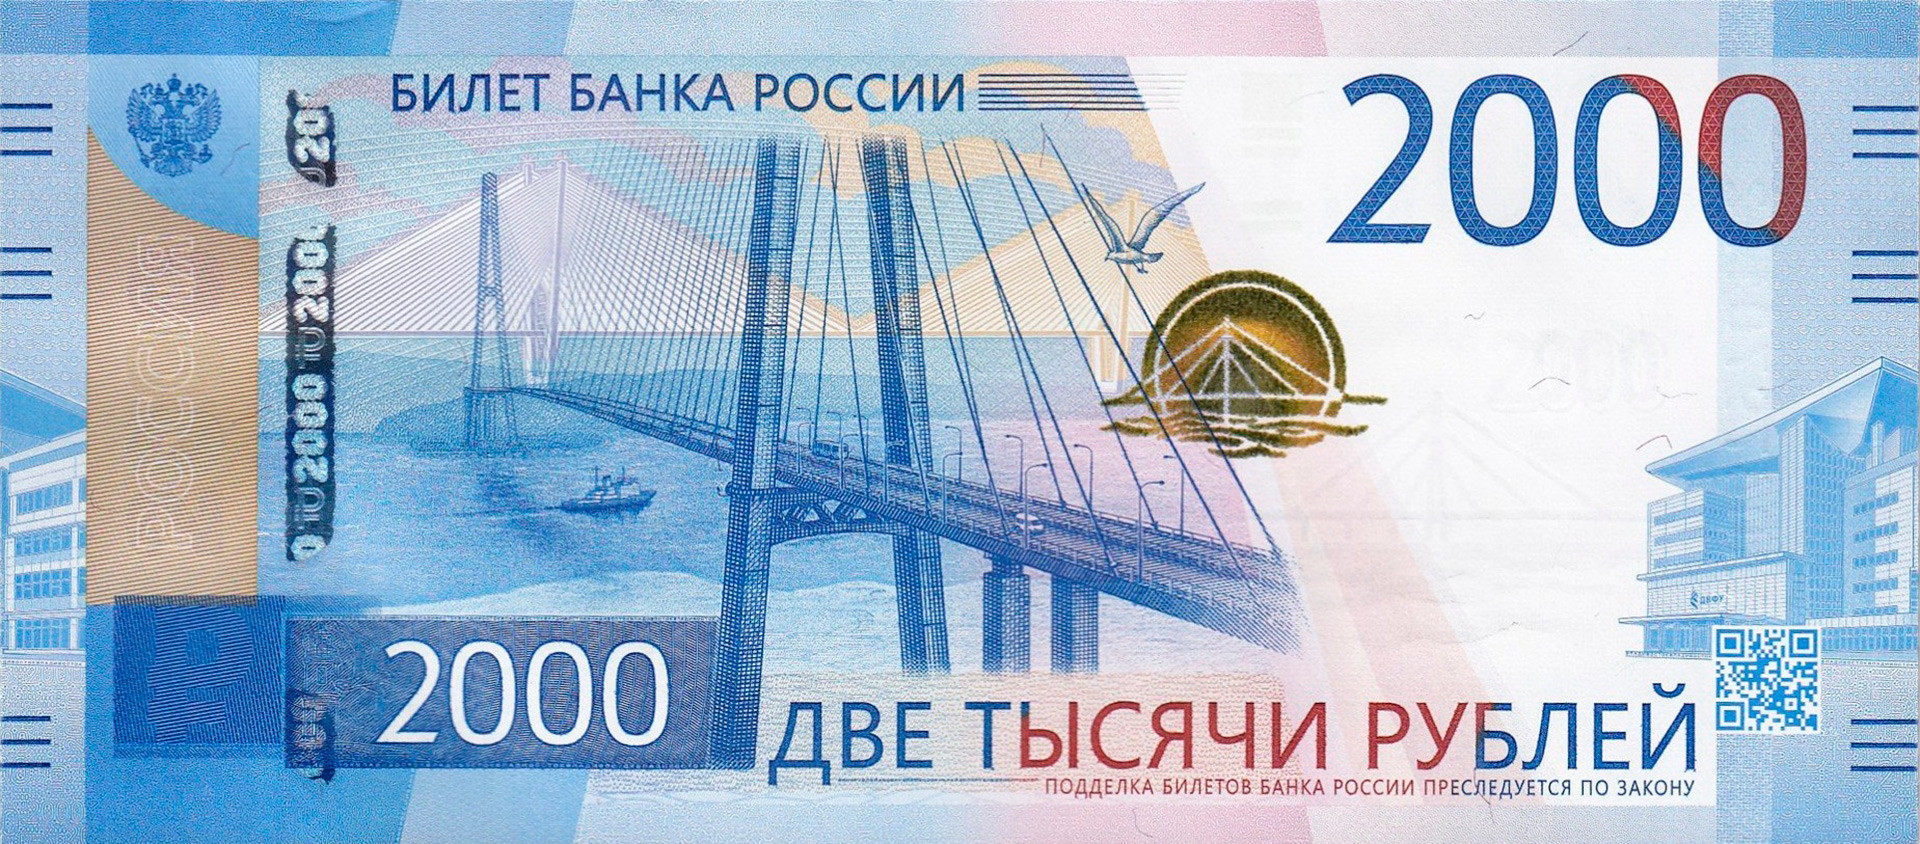 A brand-new 2,000-ruble banknote